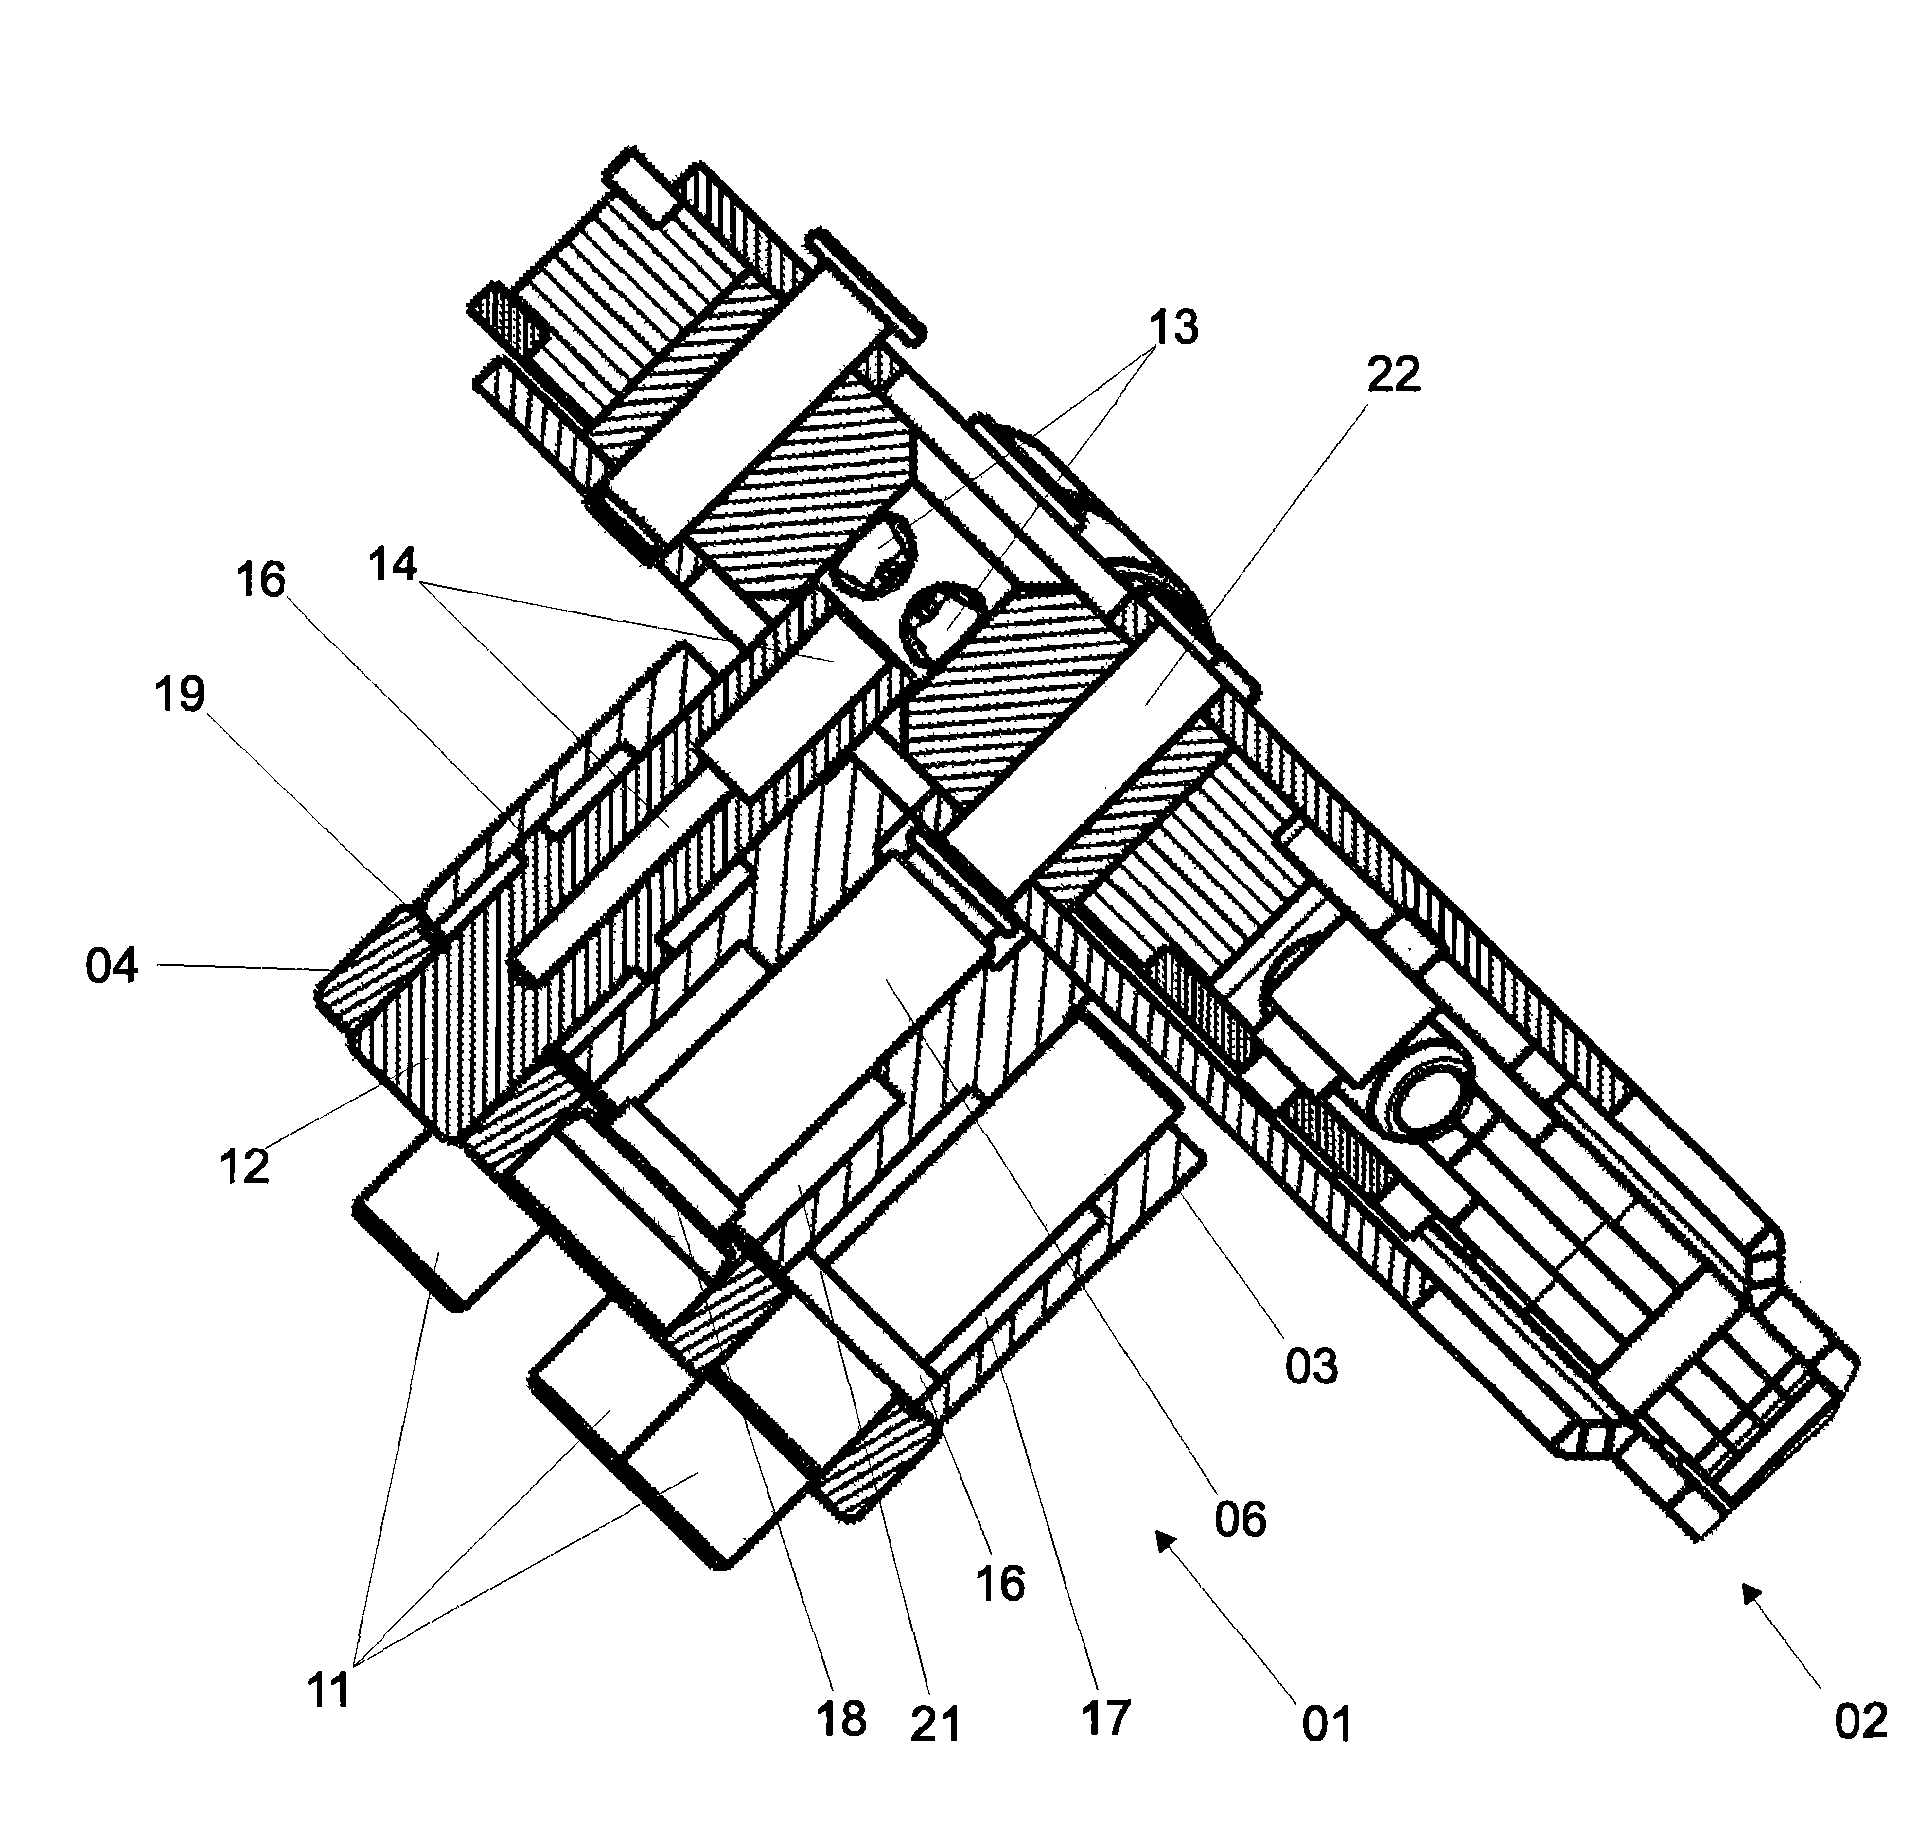 Positioning device for crimping tools